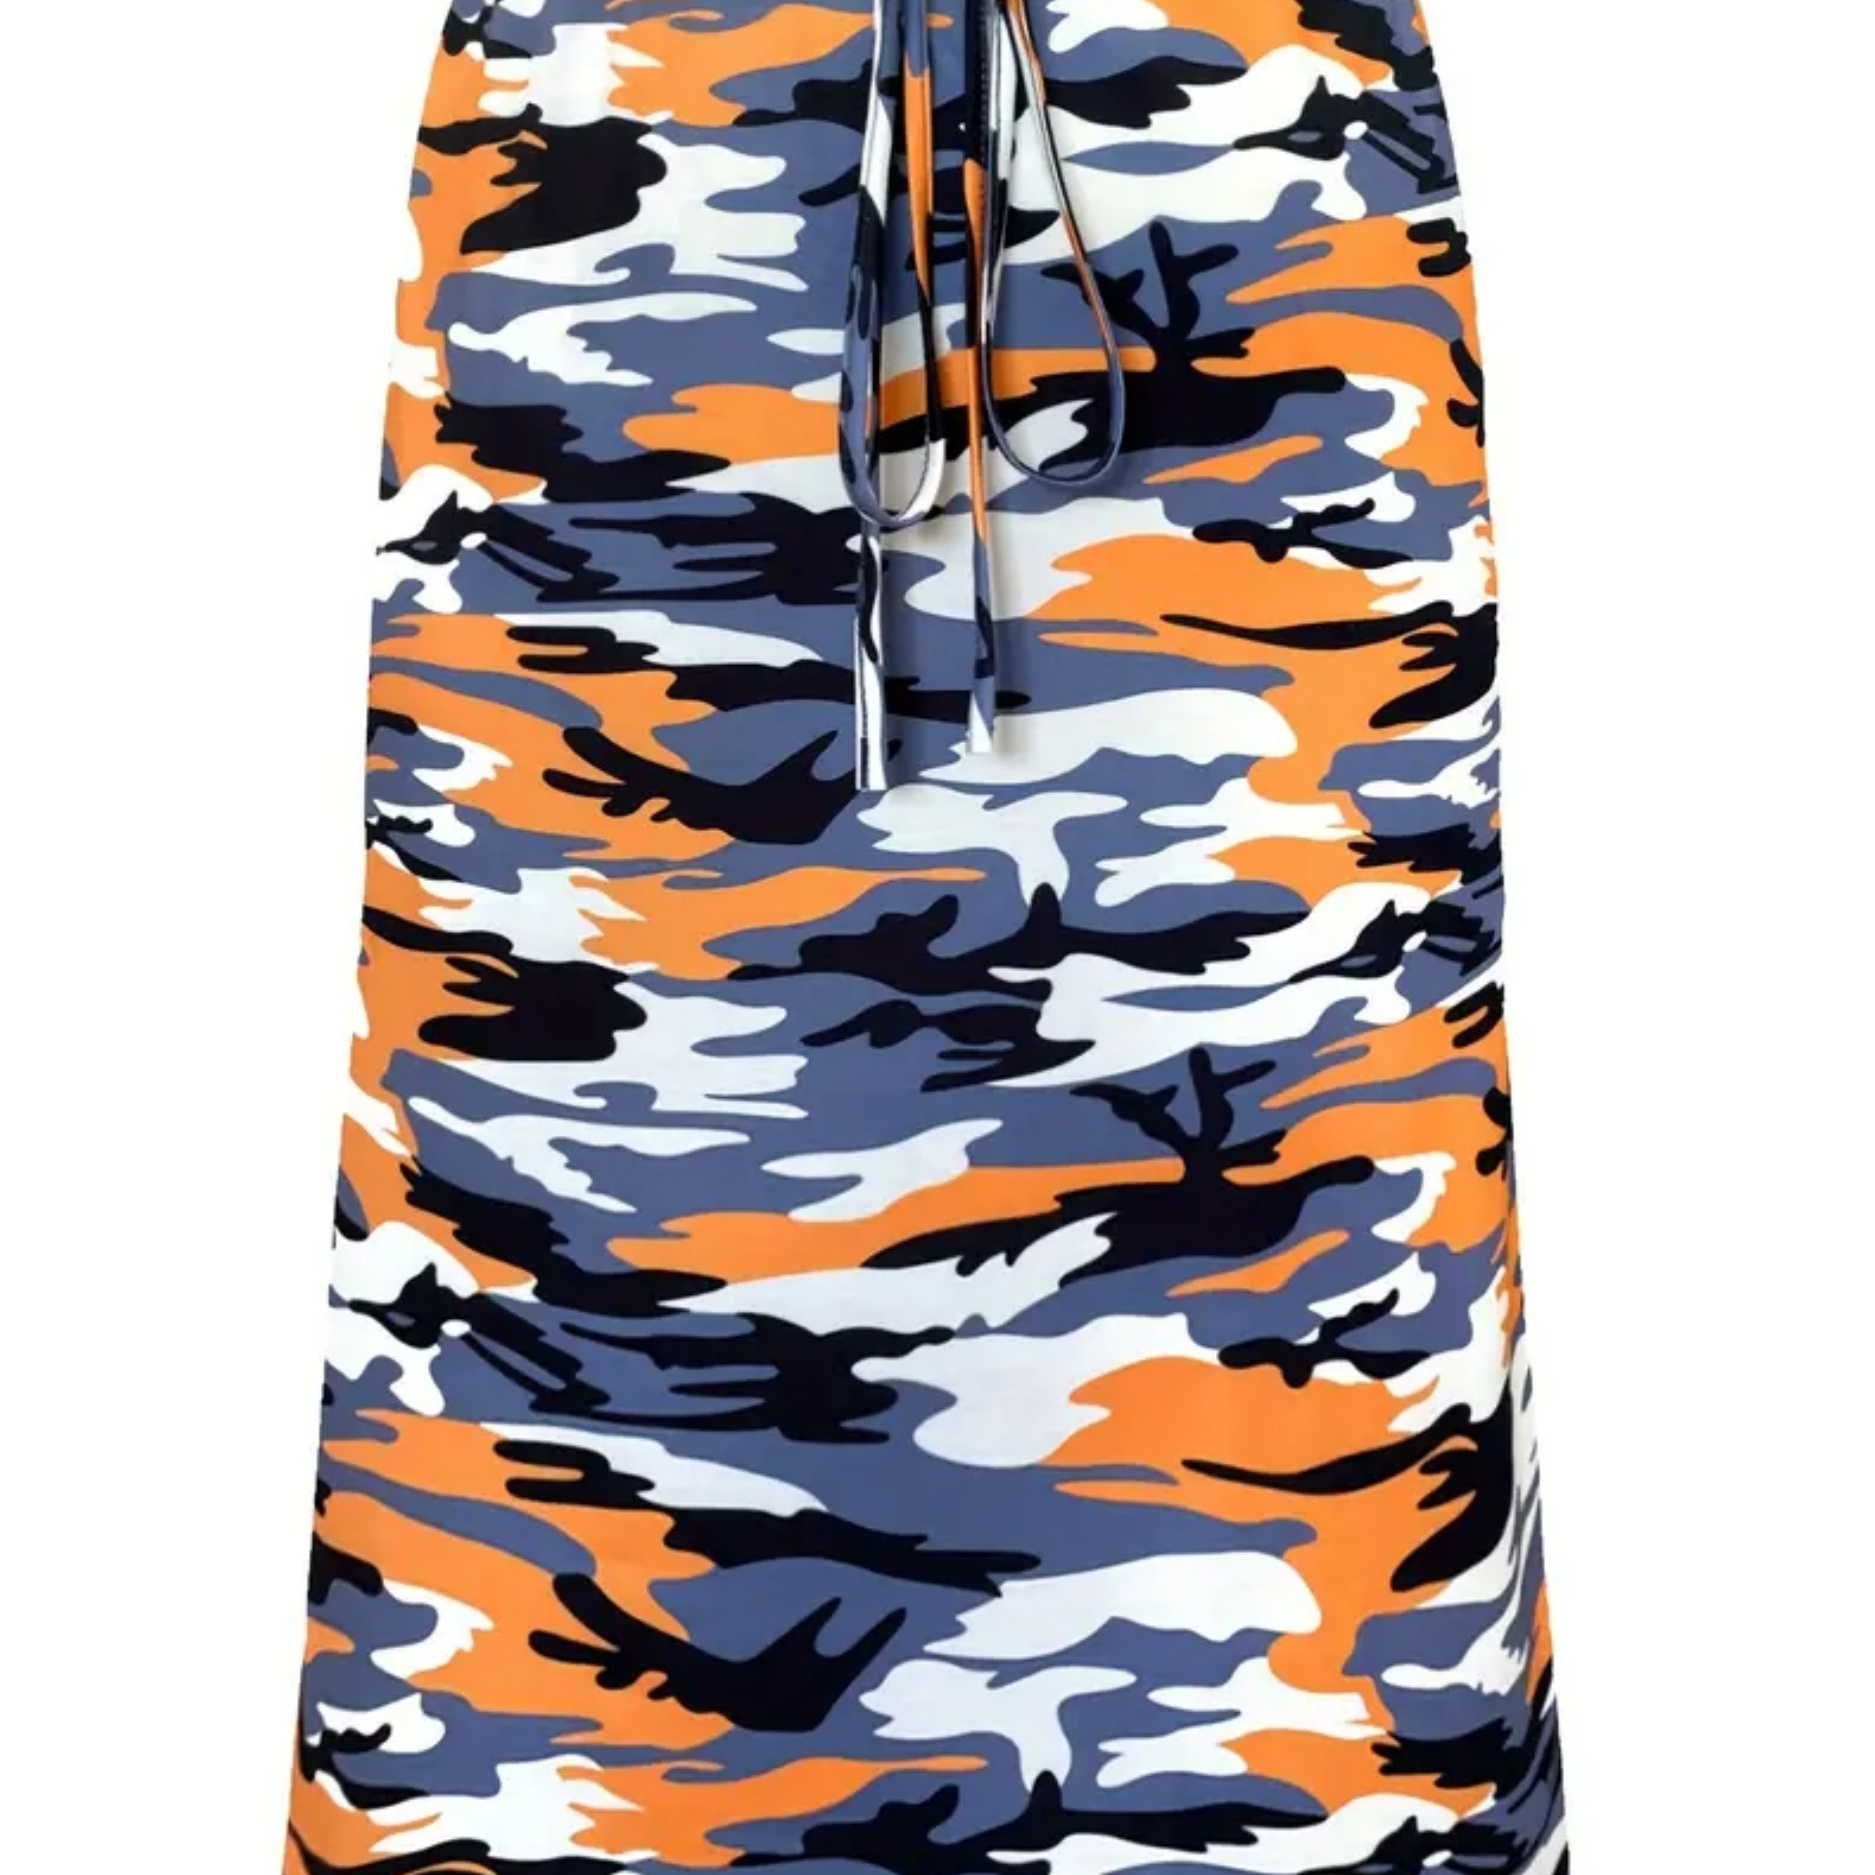 

Plus Size Camo Print Skirt, Casual Drawstring Waist Skirt For Spring & Summer, Women's Plus Size Clothing